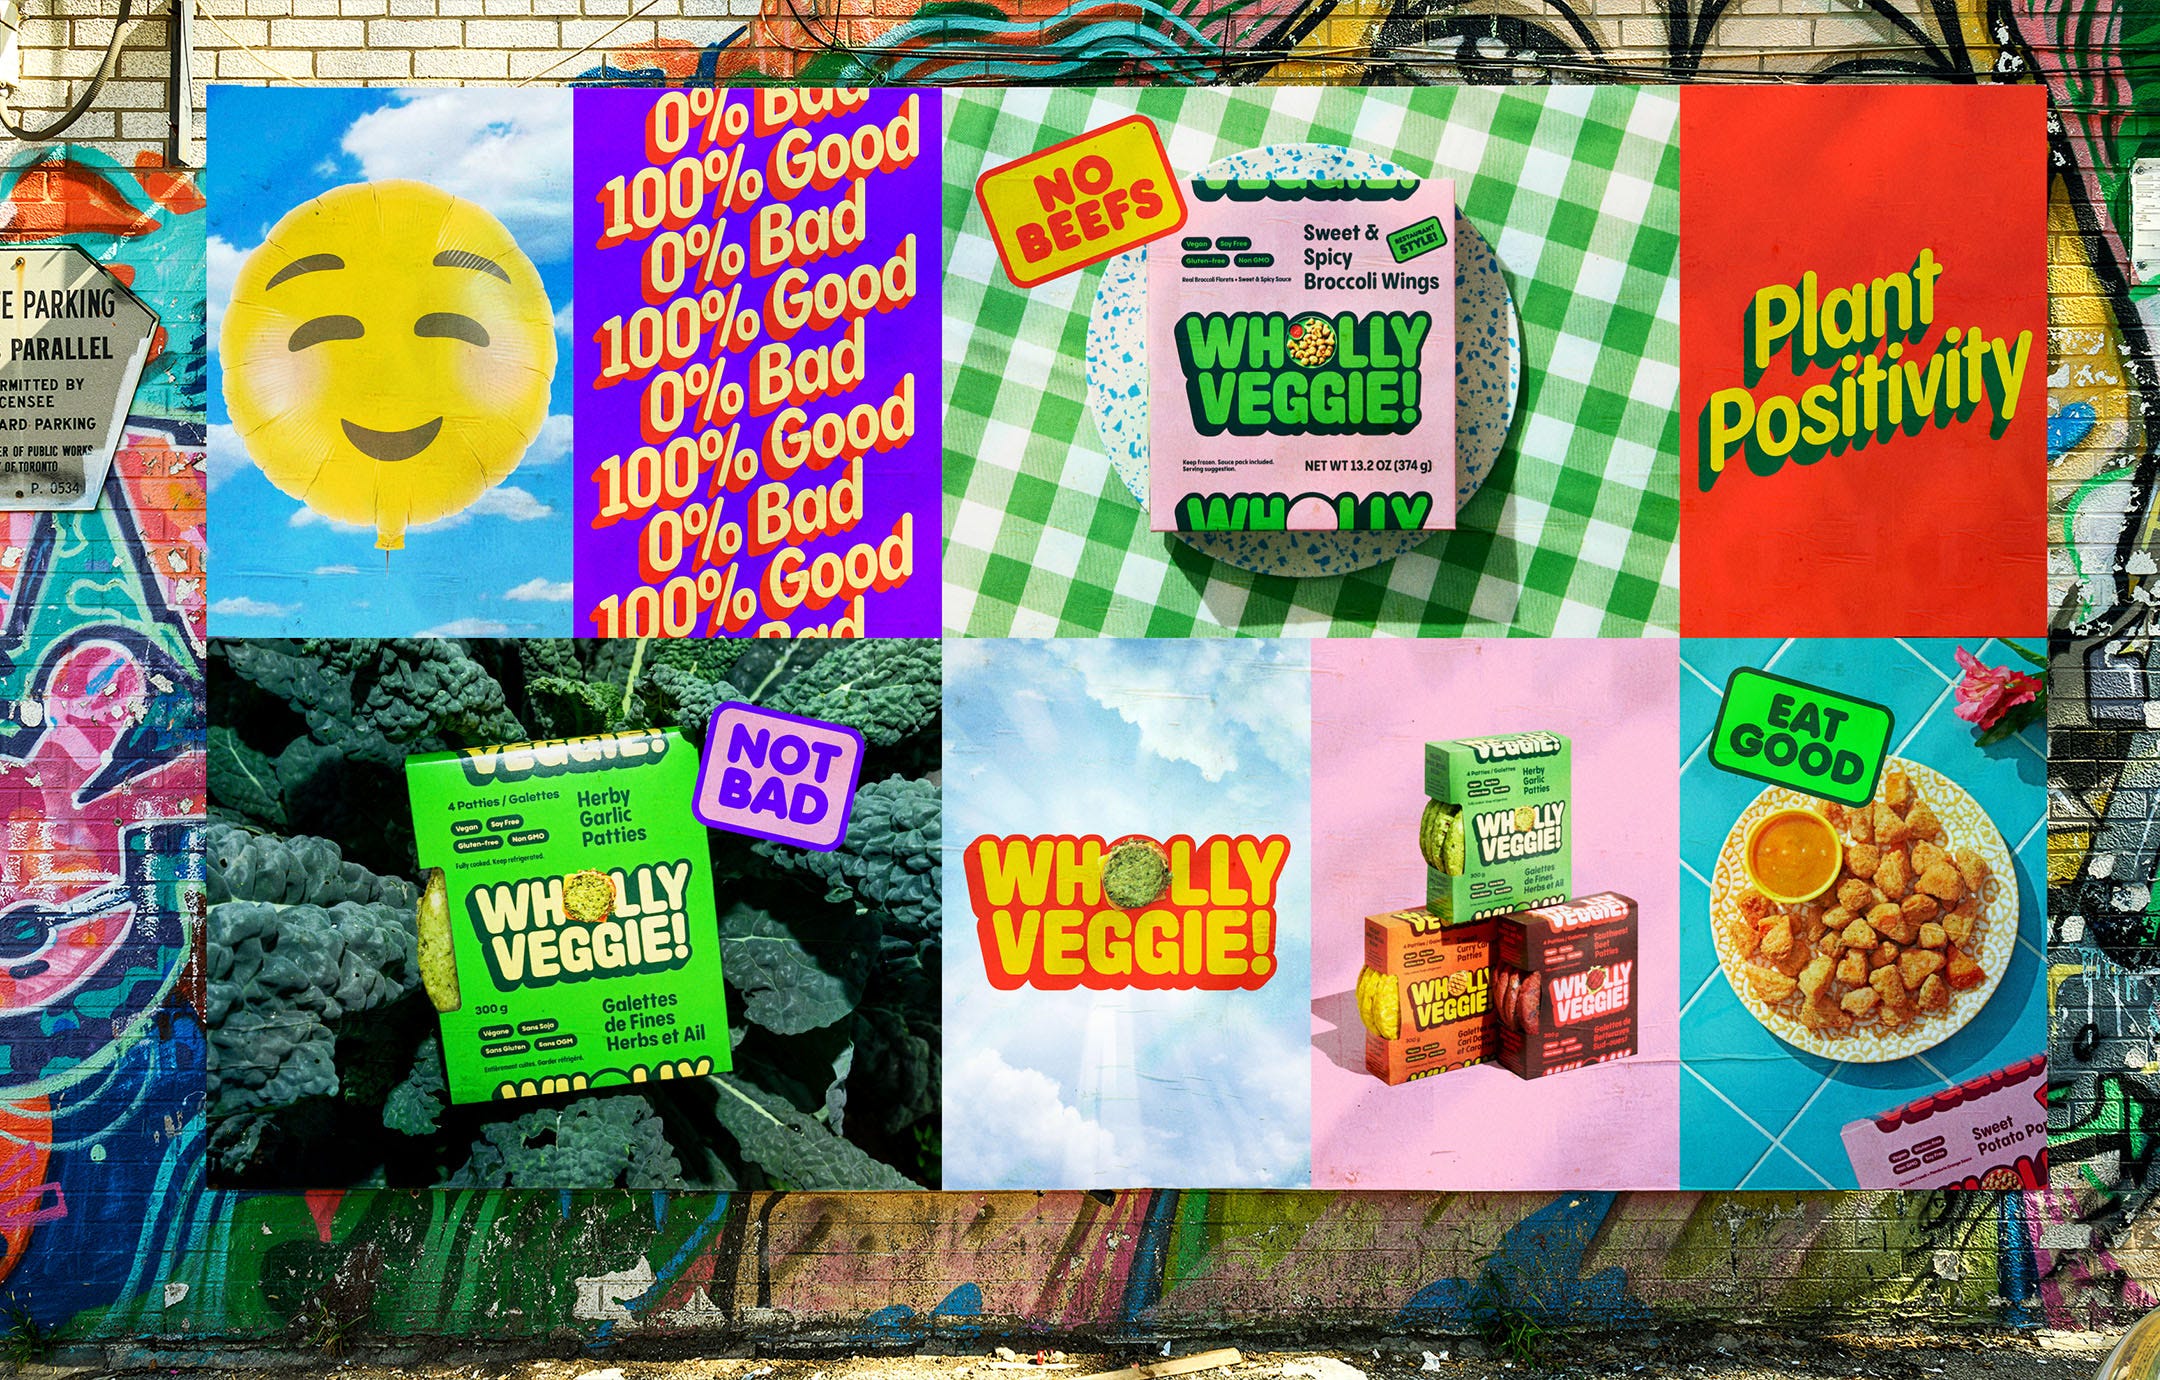 A rendering of a wall of posters featuring the Wholly Veggie rebrand